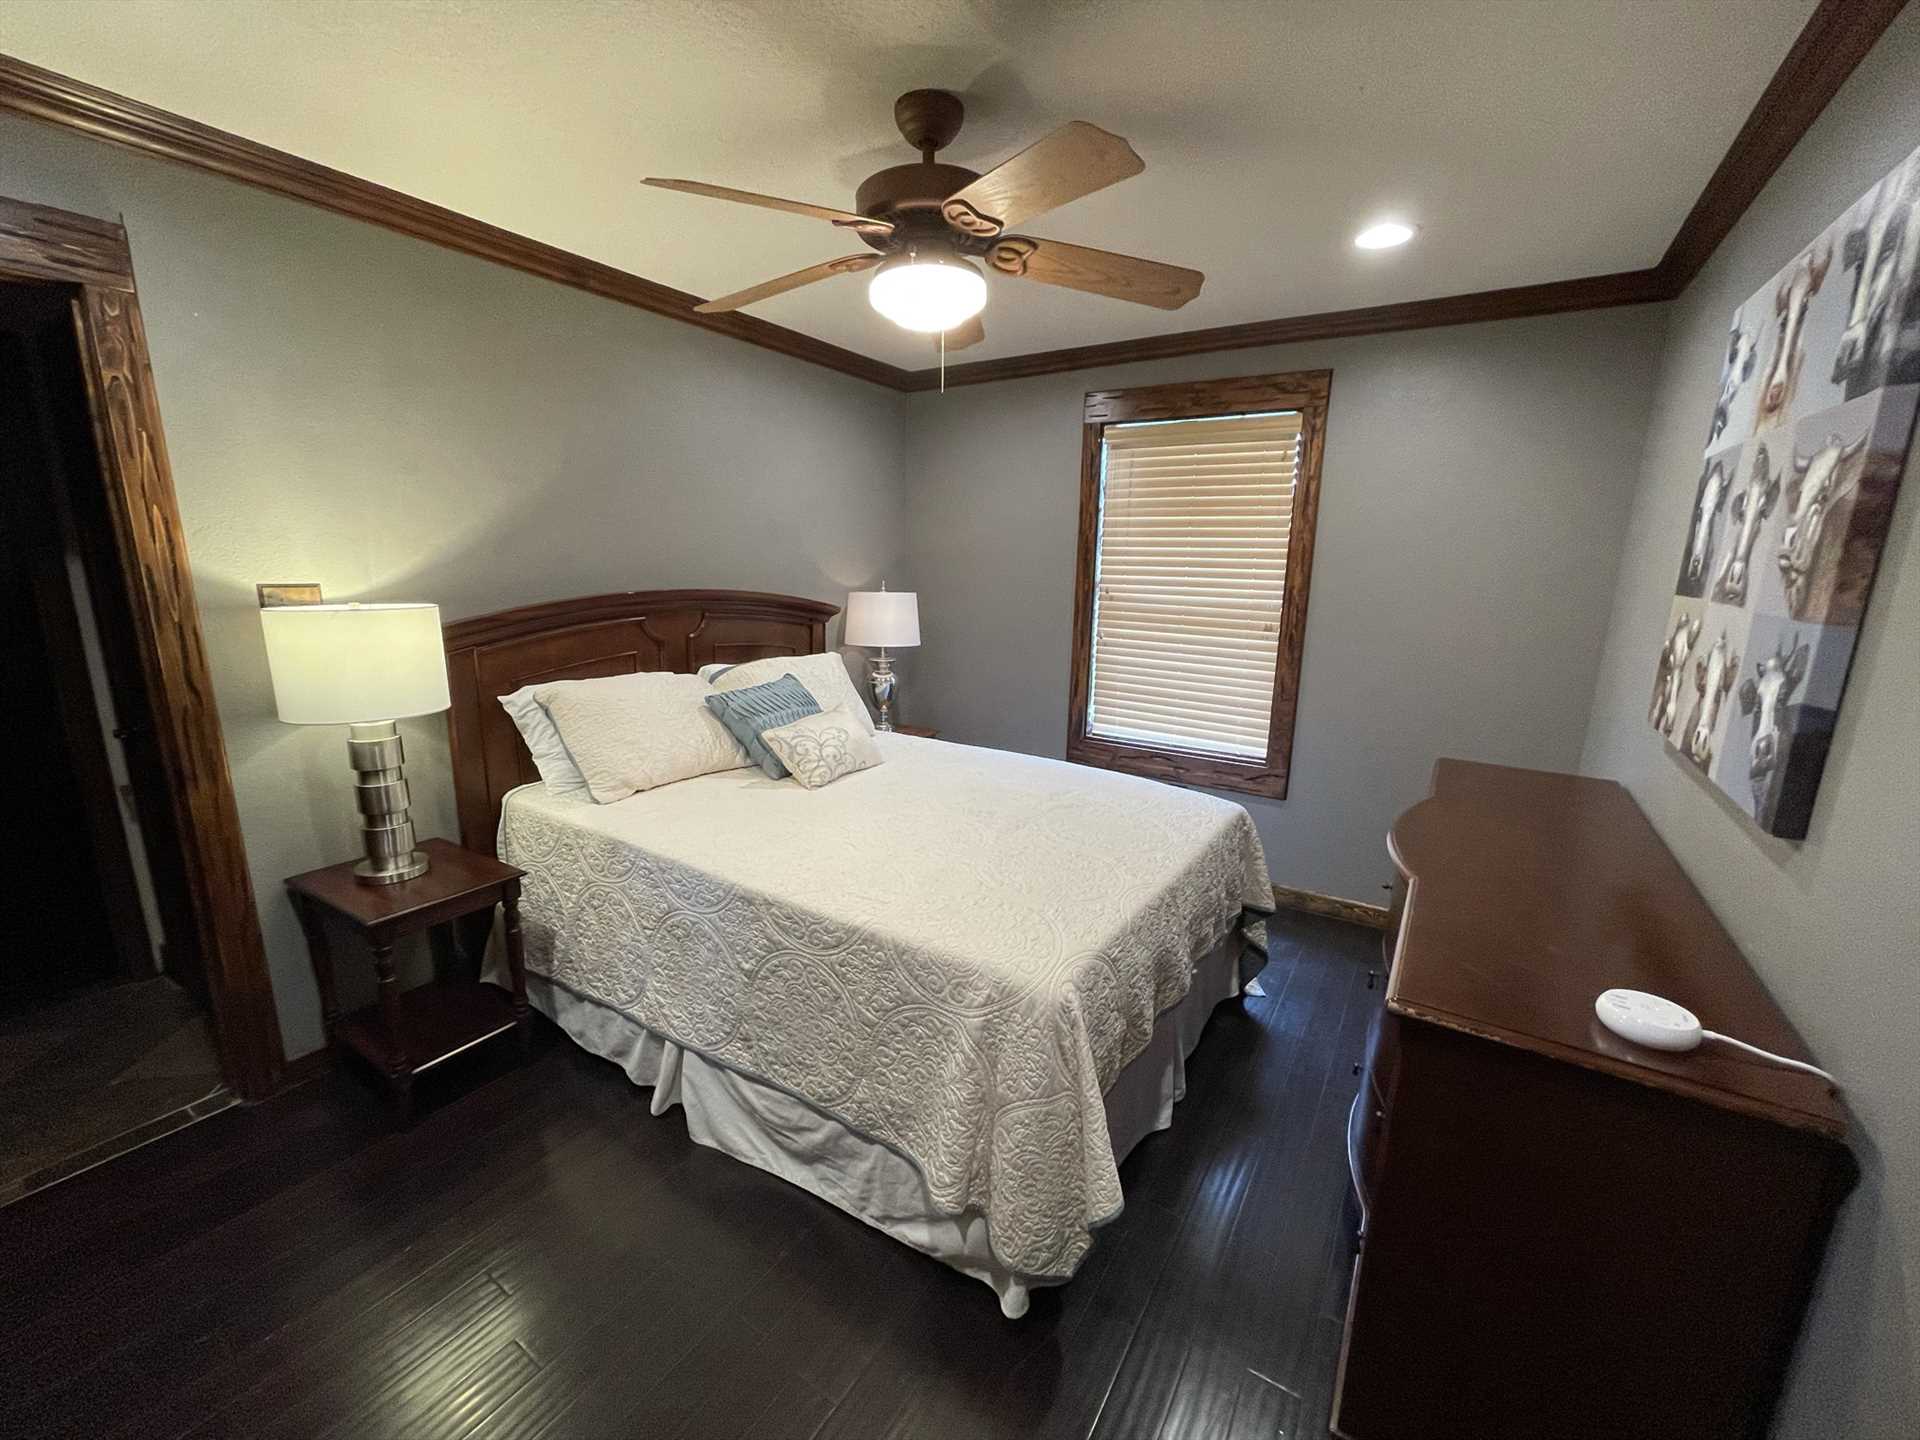                                                 With two king-sized and two queen-sized beds, the retreat provides sweet and restful shuteye for up to eight guests.